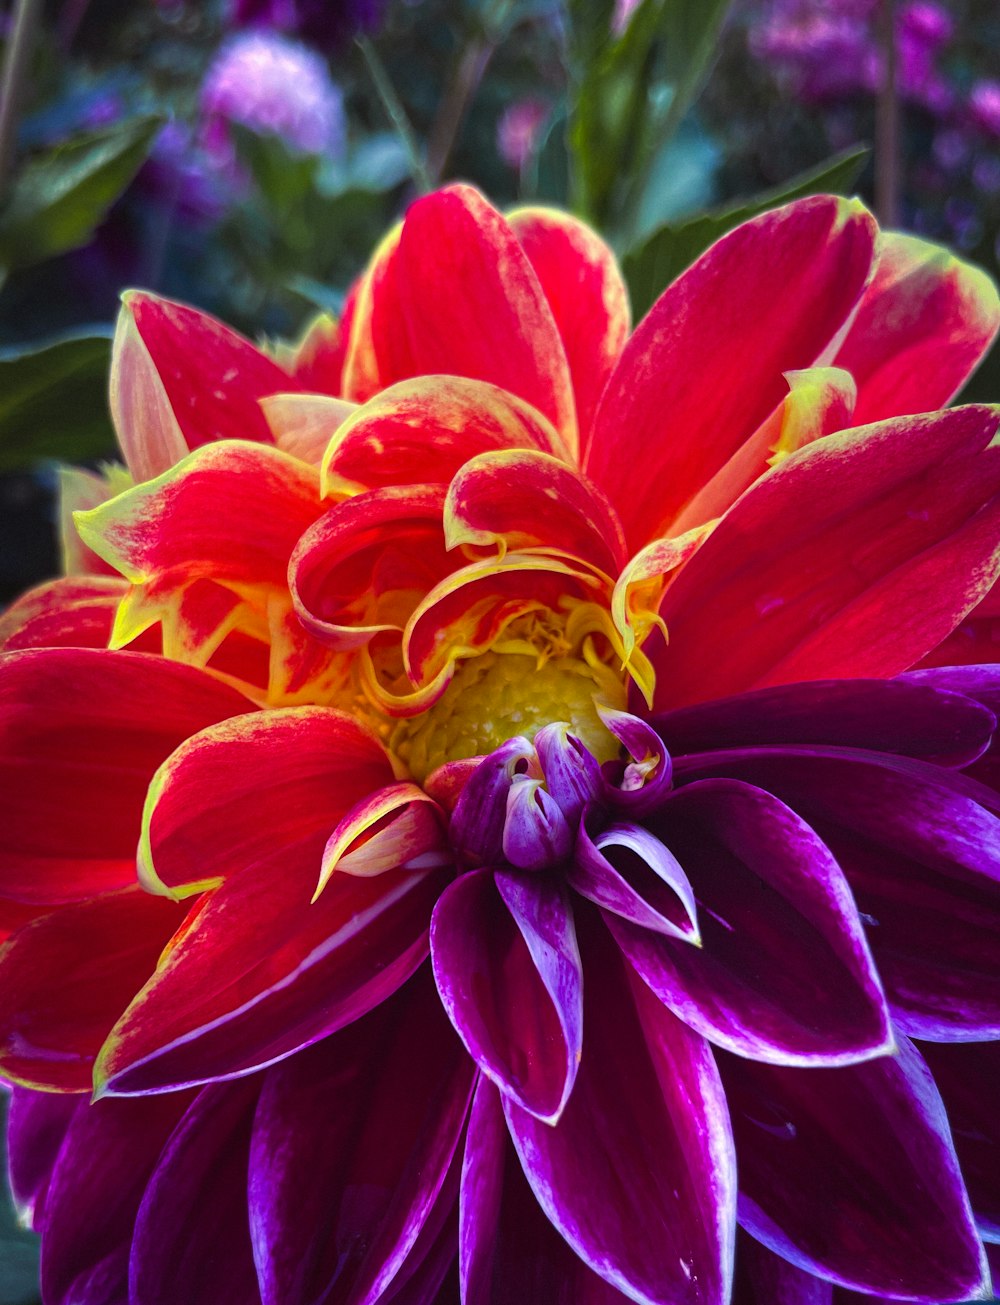 a large red and yellow flower in a garden